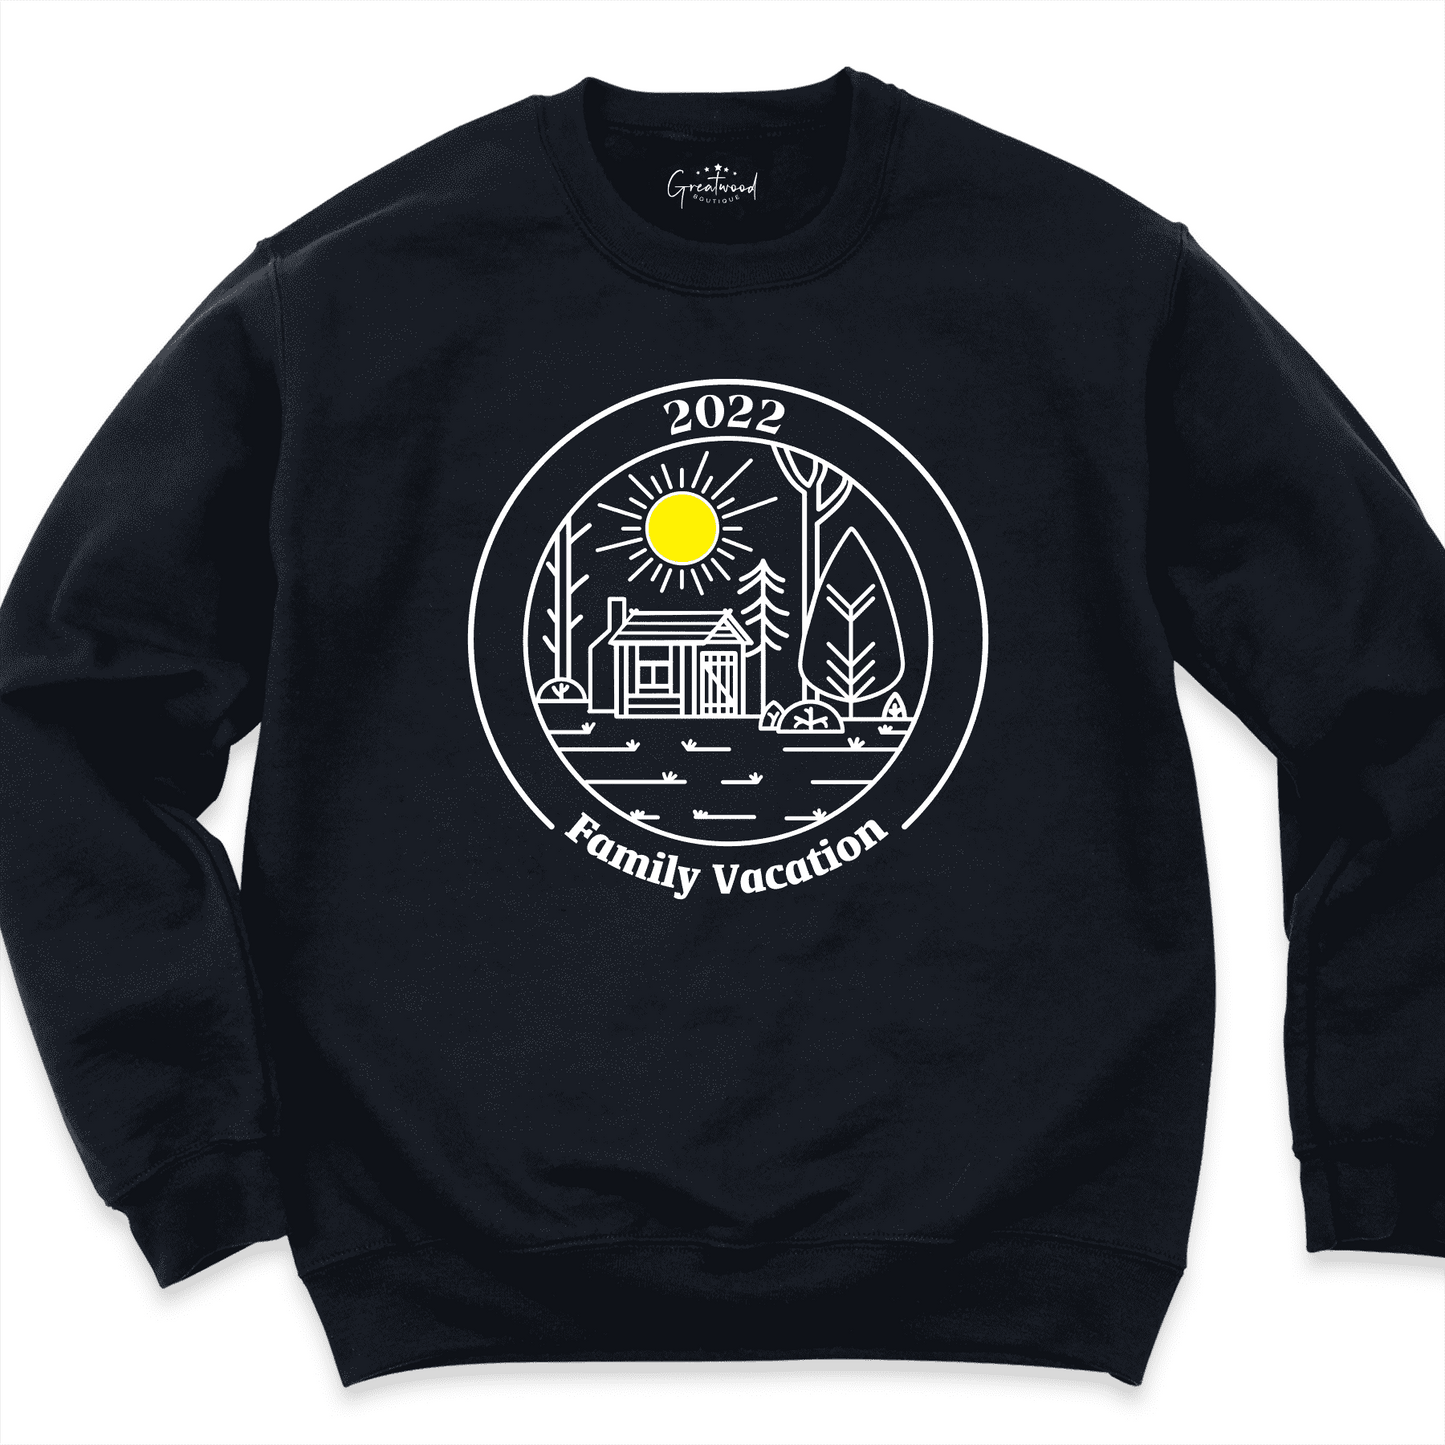 Family Vacation 2022 Sweatshirt Black - Greatwood Boutique